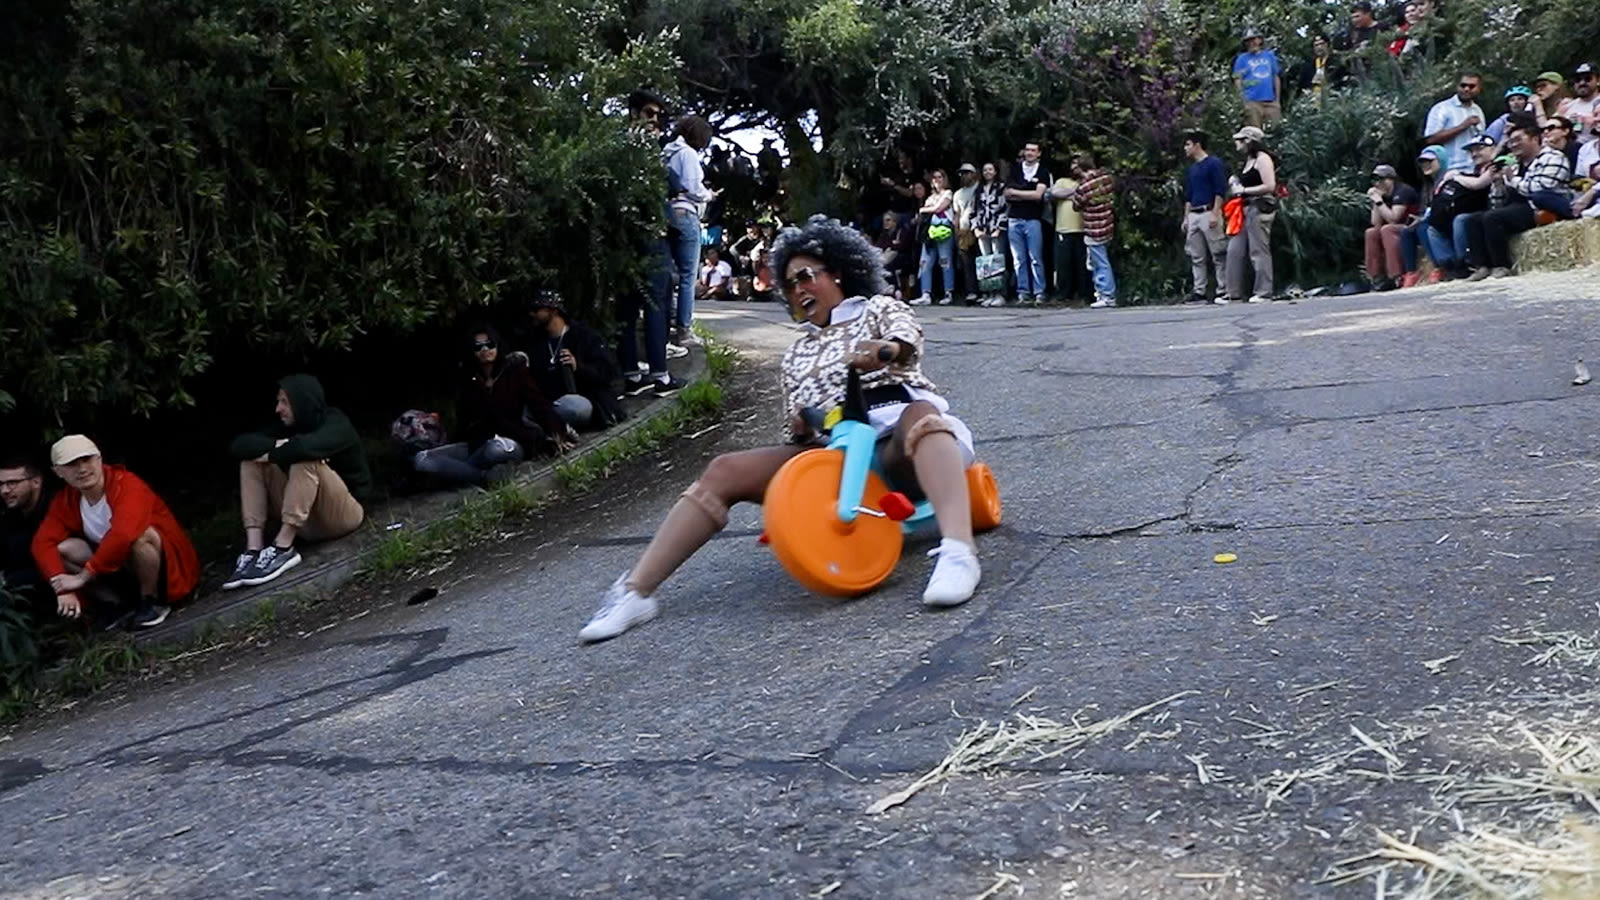 Bring your own big wheel and let the good times roll down San Francisco's "crookedest" street